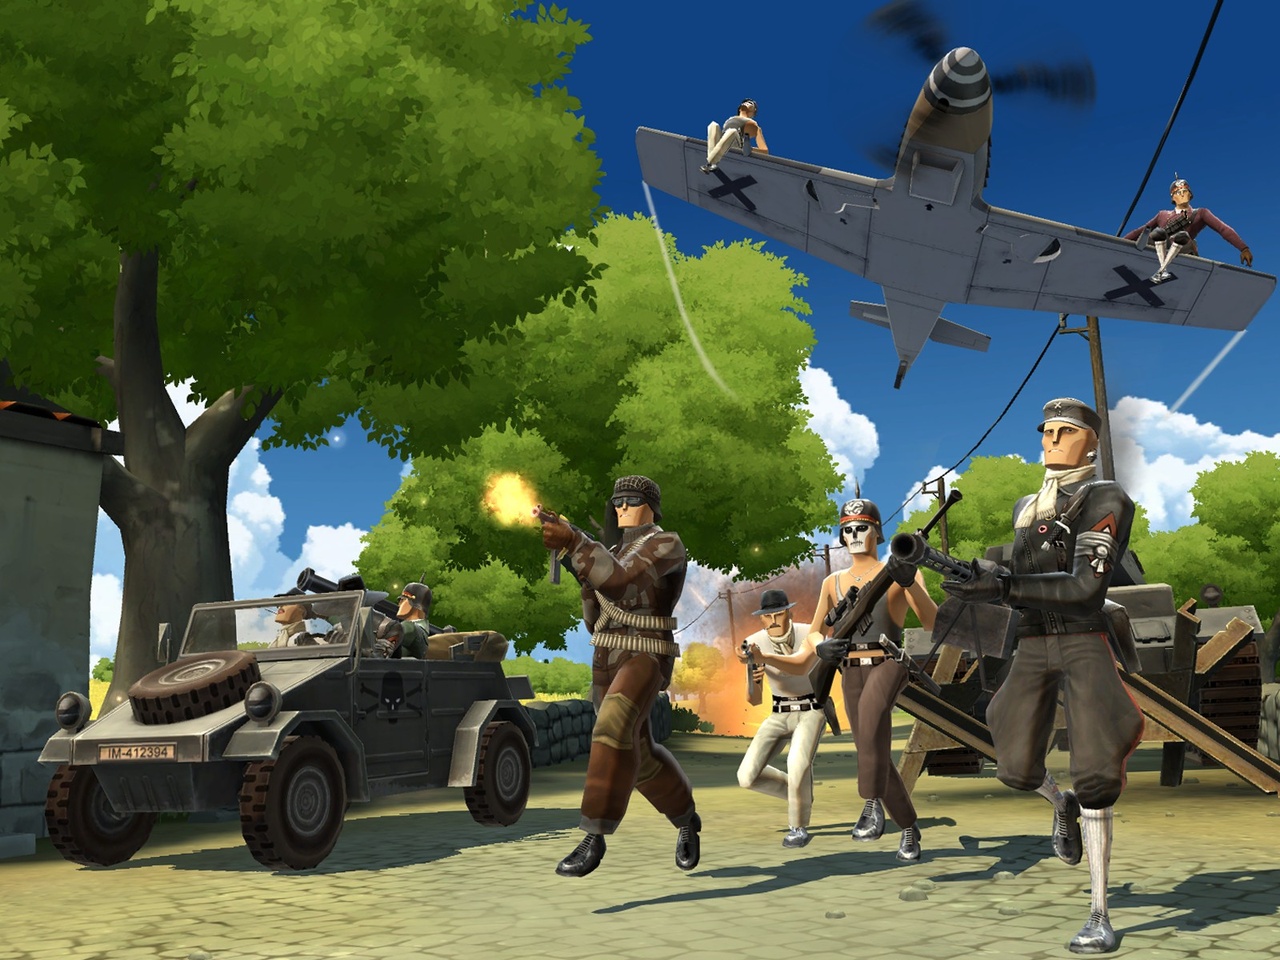 Battlefield Heroes boasts a range of crazy characters and vehicles.